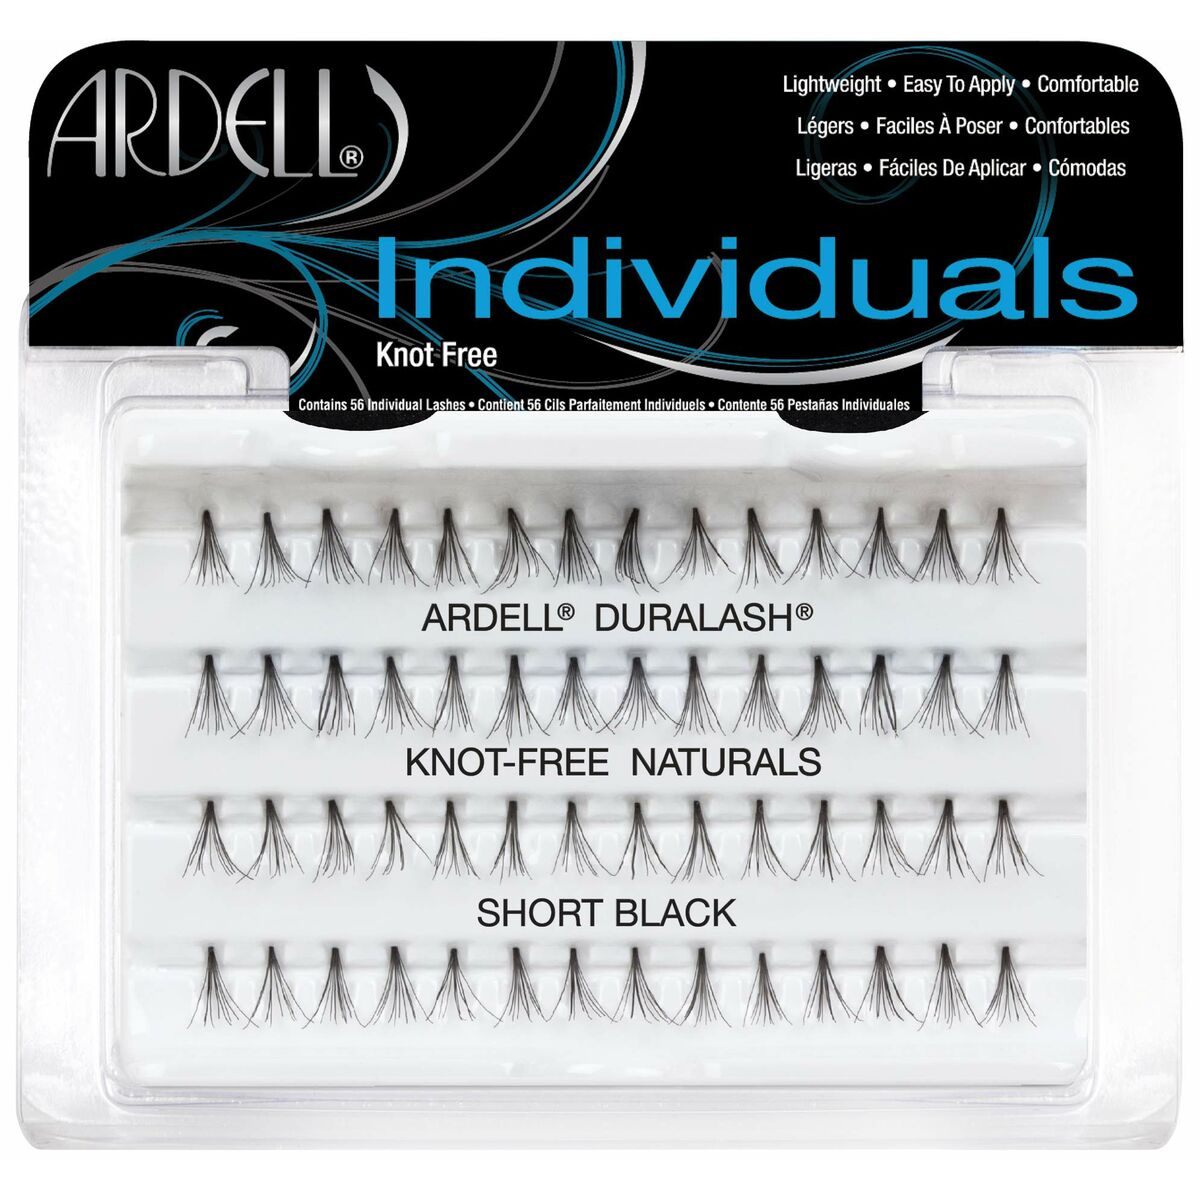 Faux cils Ardell Individuals 56 Pièces